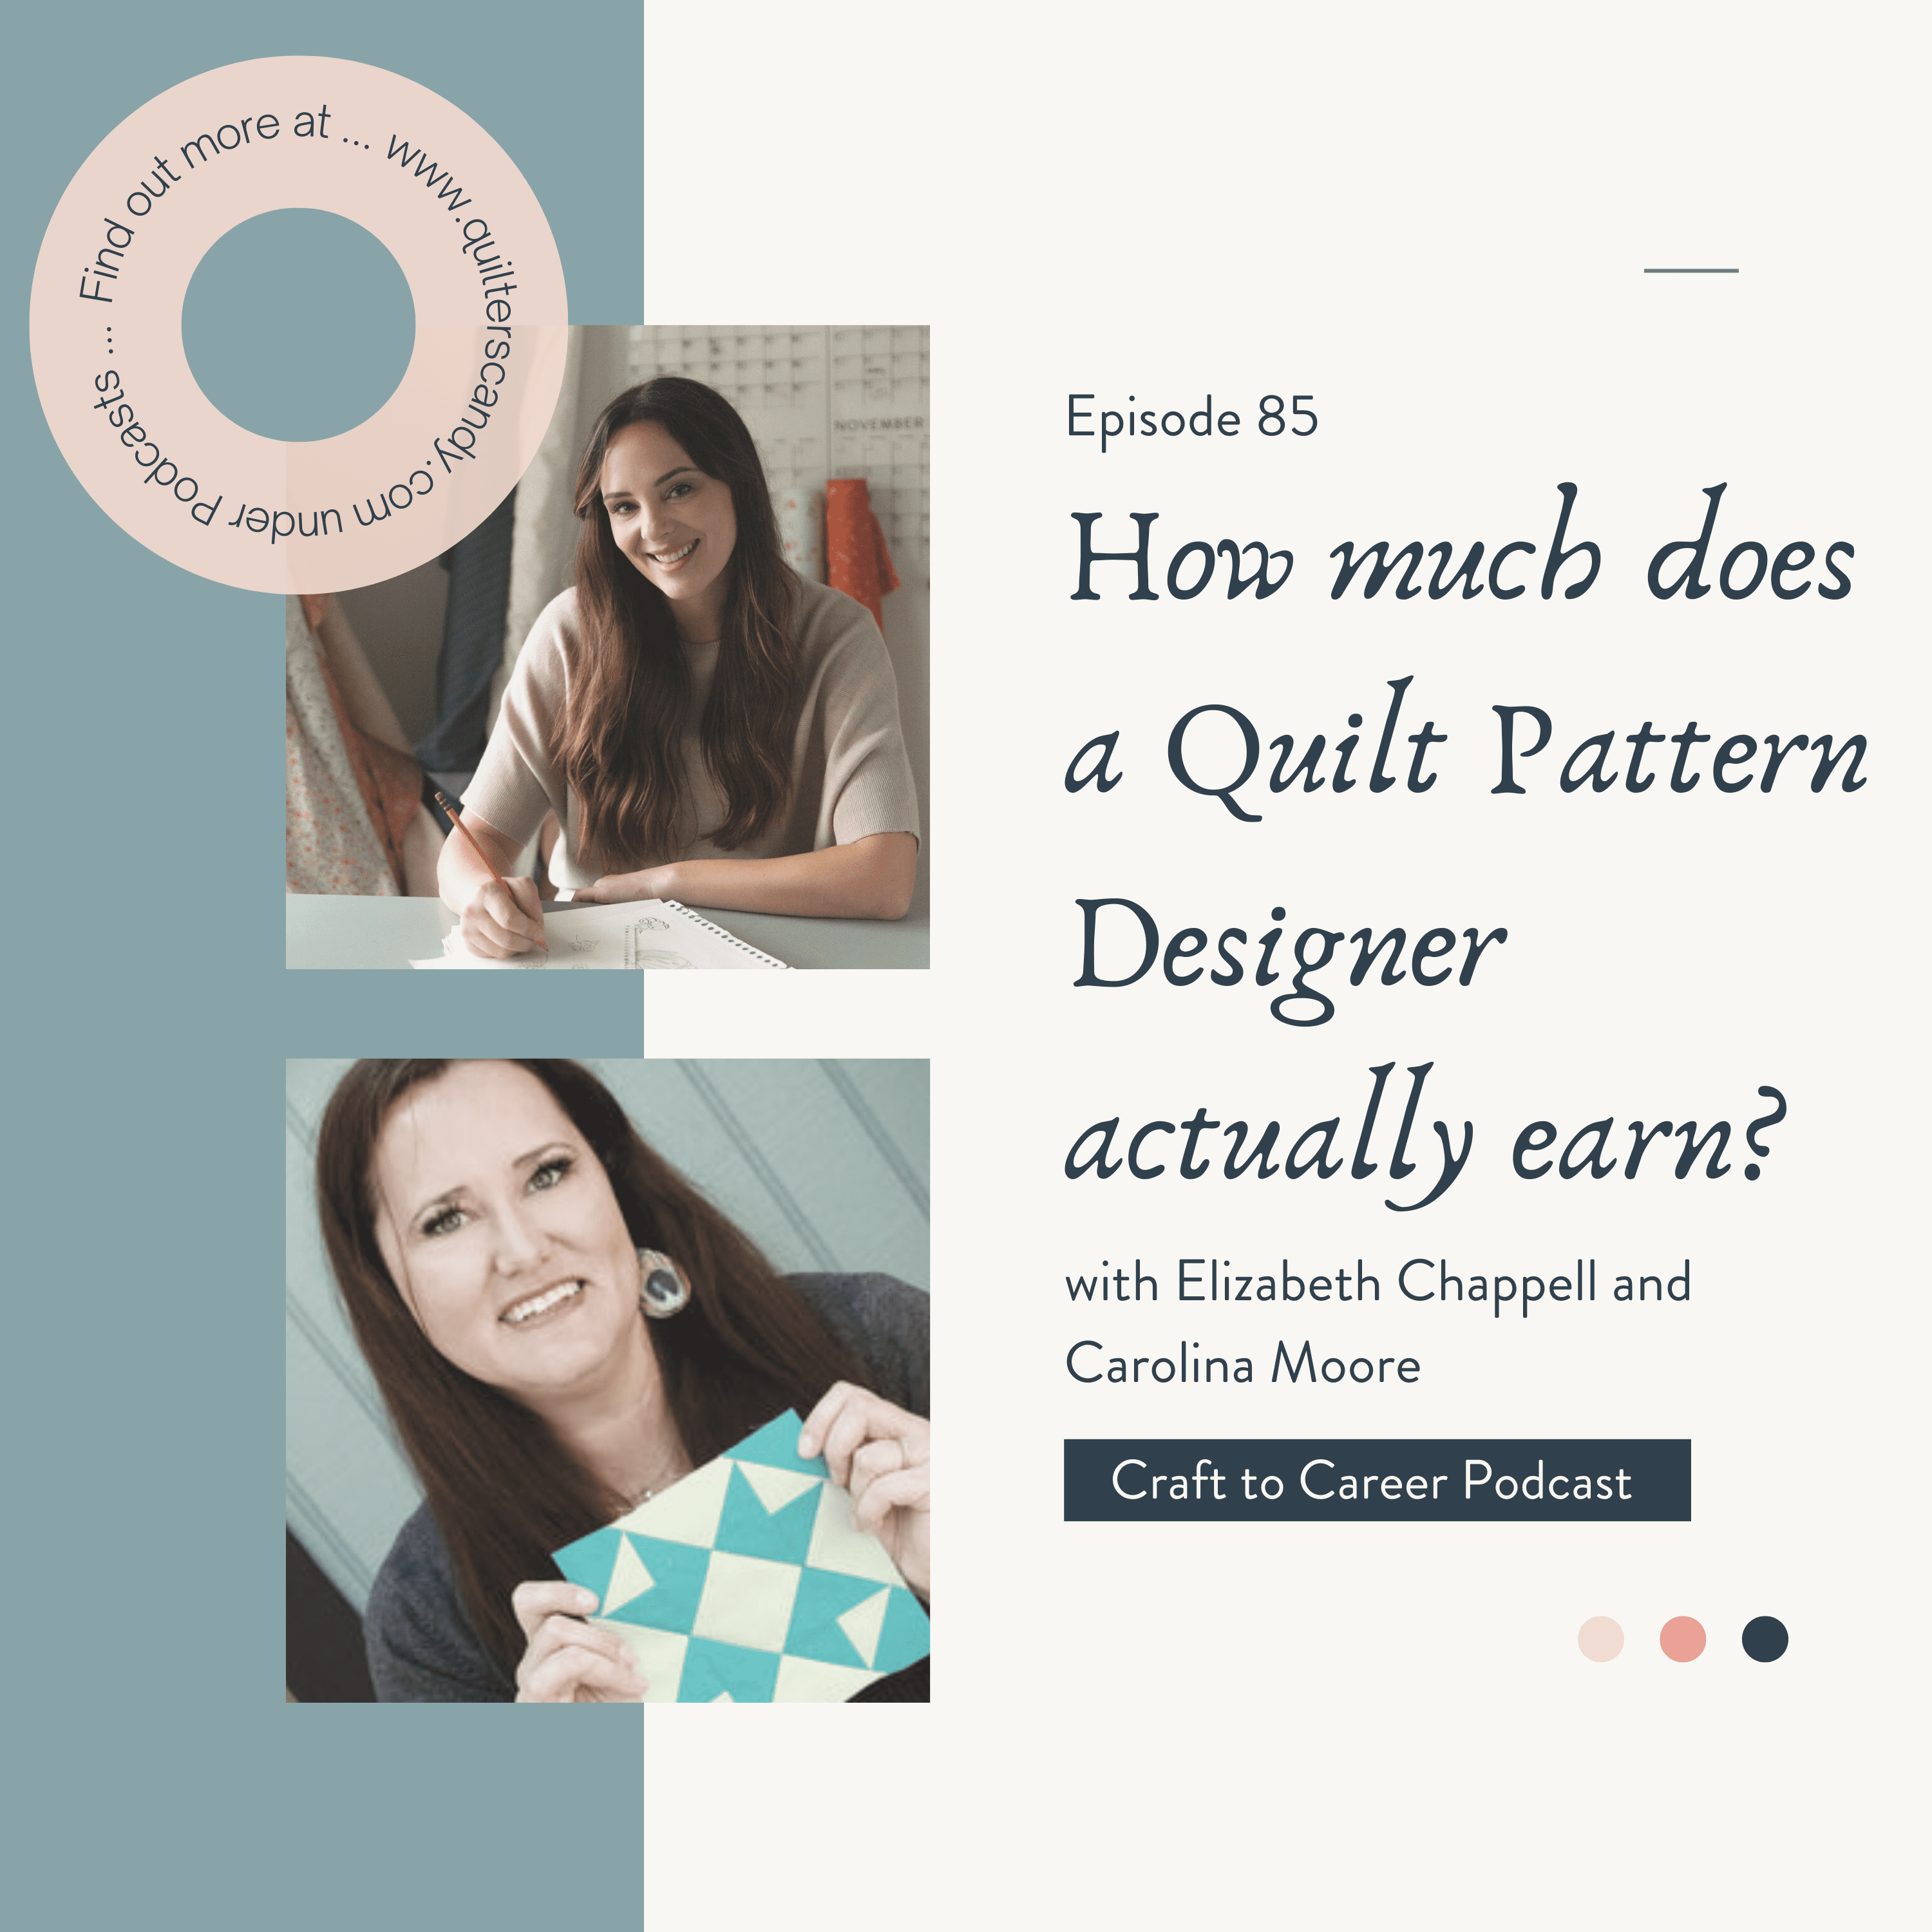 How much does a Quilt Pattern Designer actually make?